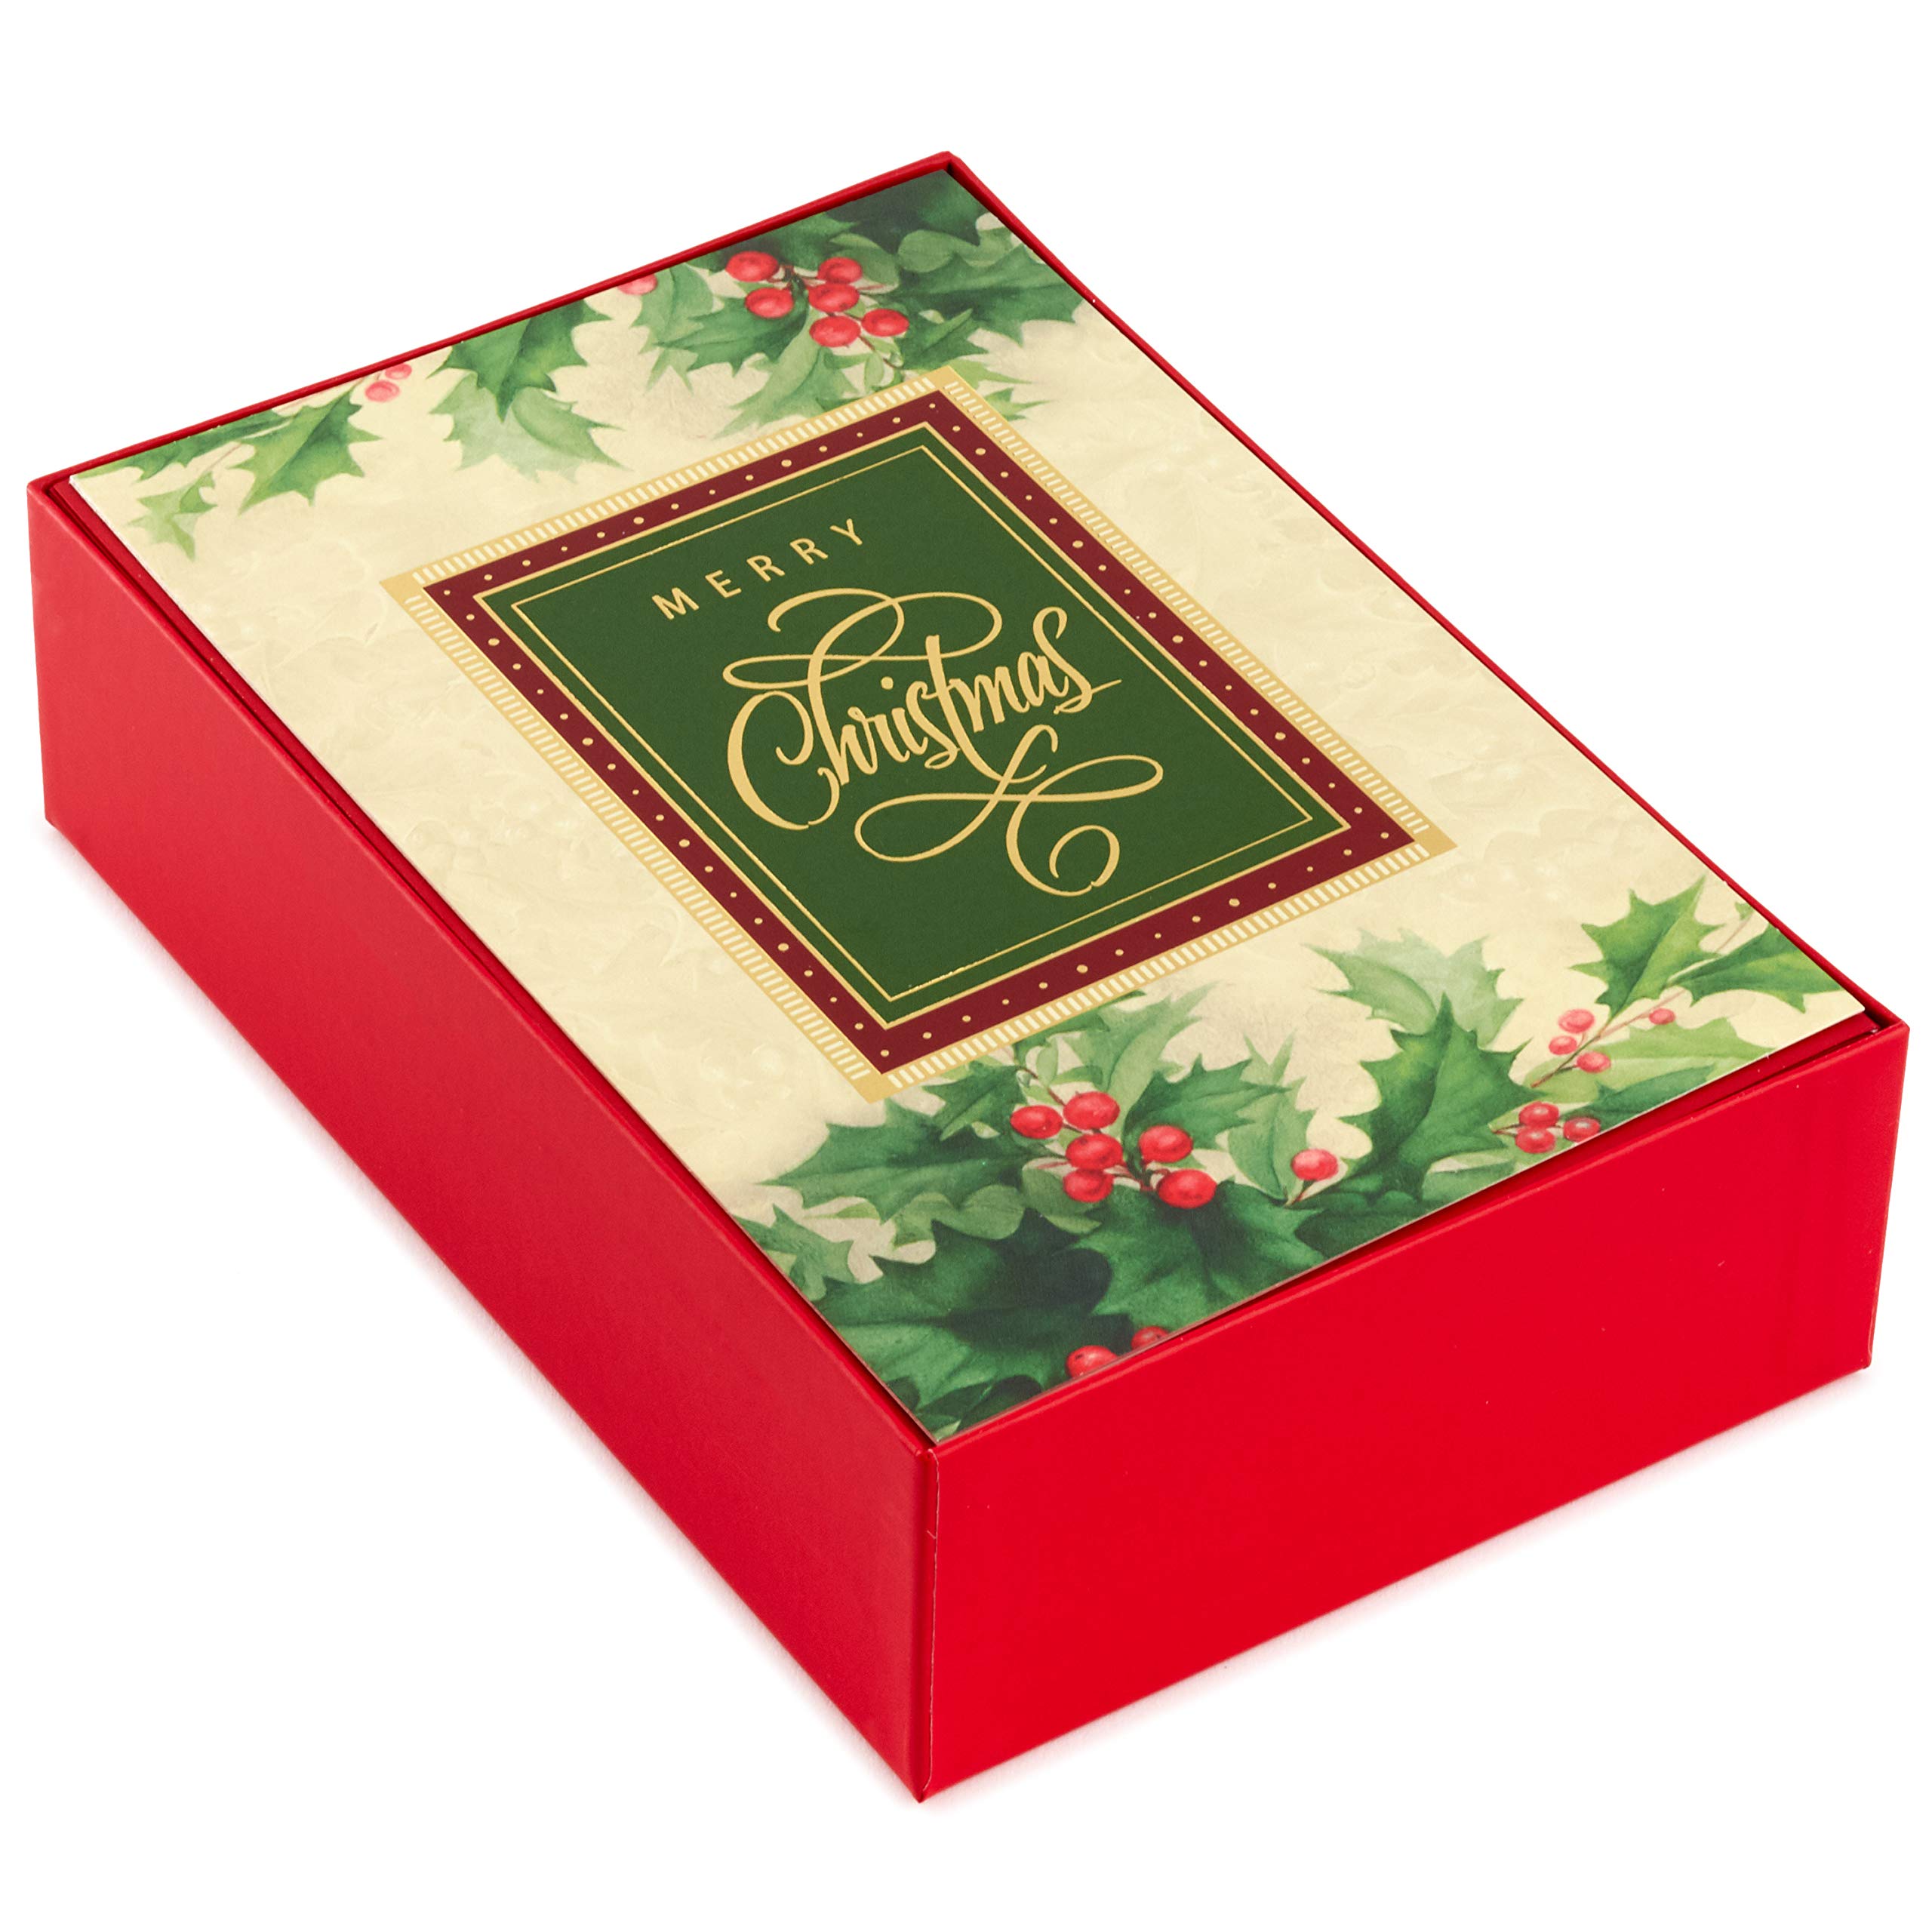 Hallmark Christmas Boxed Cards, Holiday Holly (40 Christmas Cards with Envelopes)